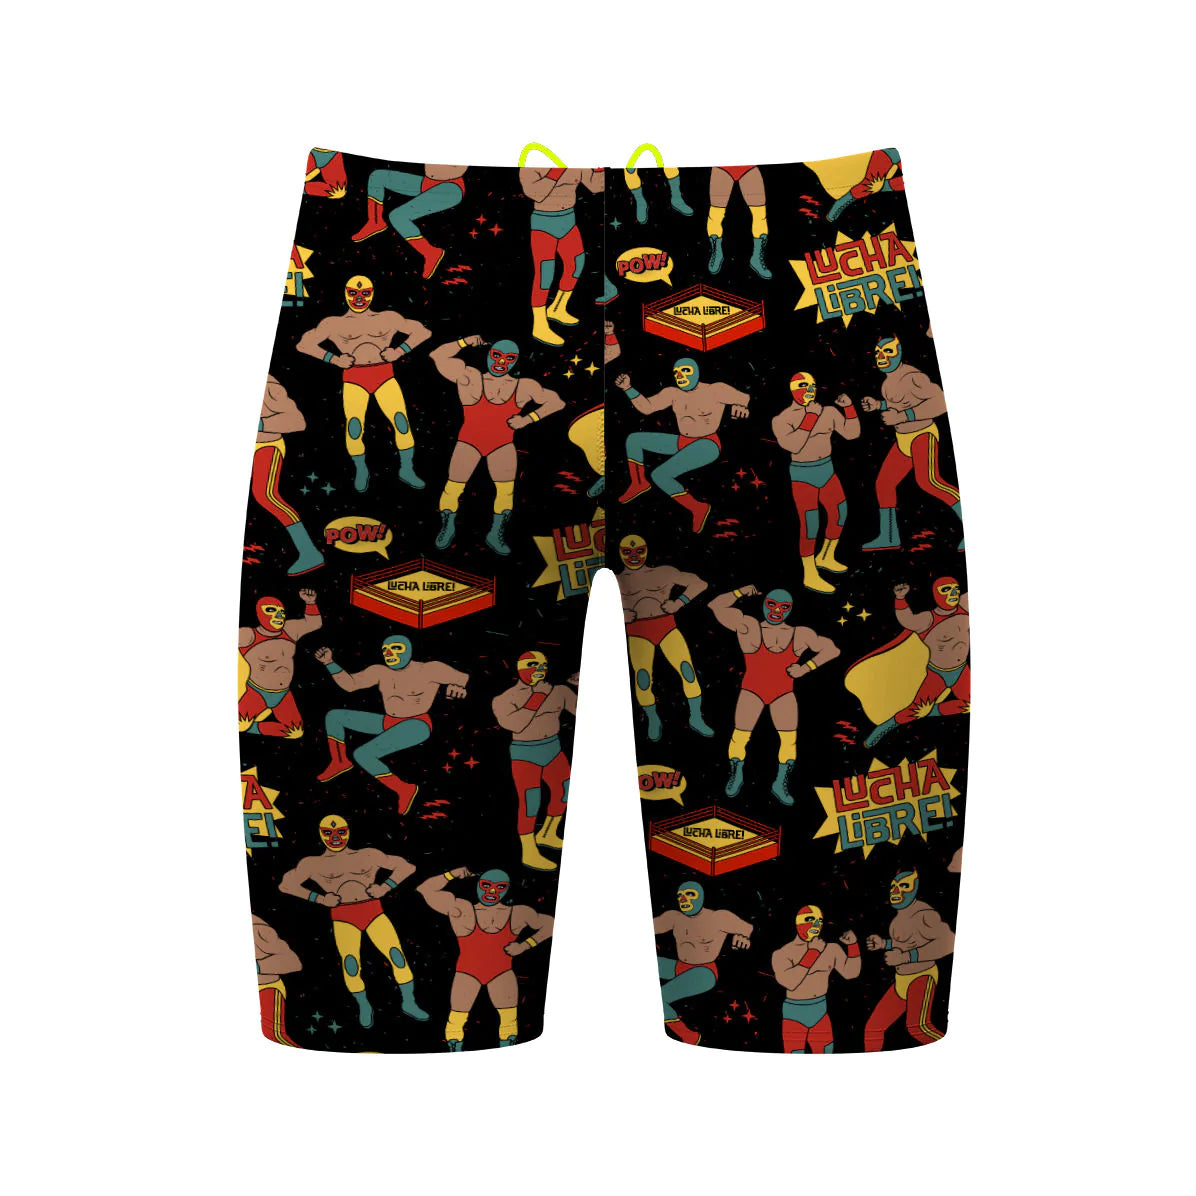 Lucha Libre - Jammer Swimsuit